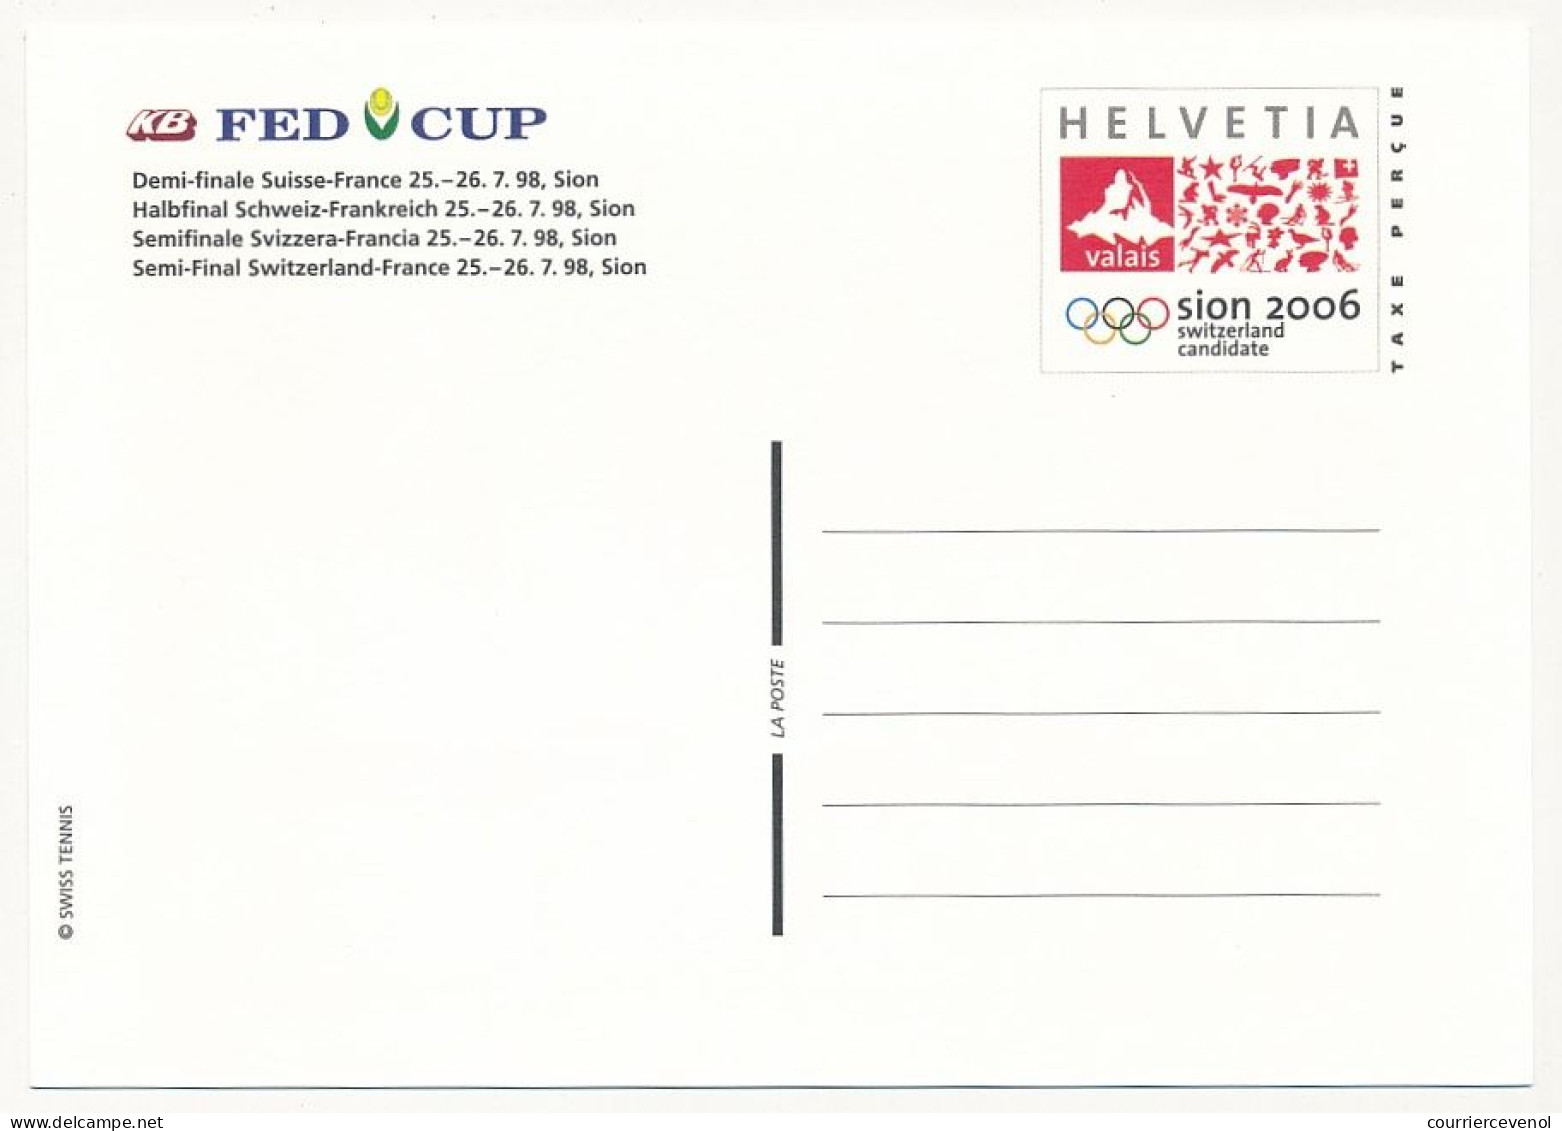 SUISSE => 8 Entiers Postaux (CP) => Candidature Sion Pour JO. FED CUP - 2 Obl Demi Finale Suisse France, 2 Obl Finale + - Stamped Stationery